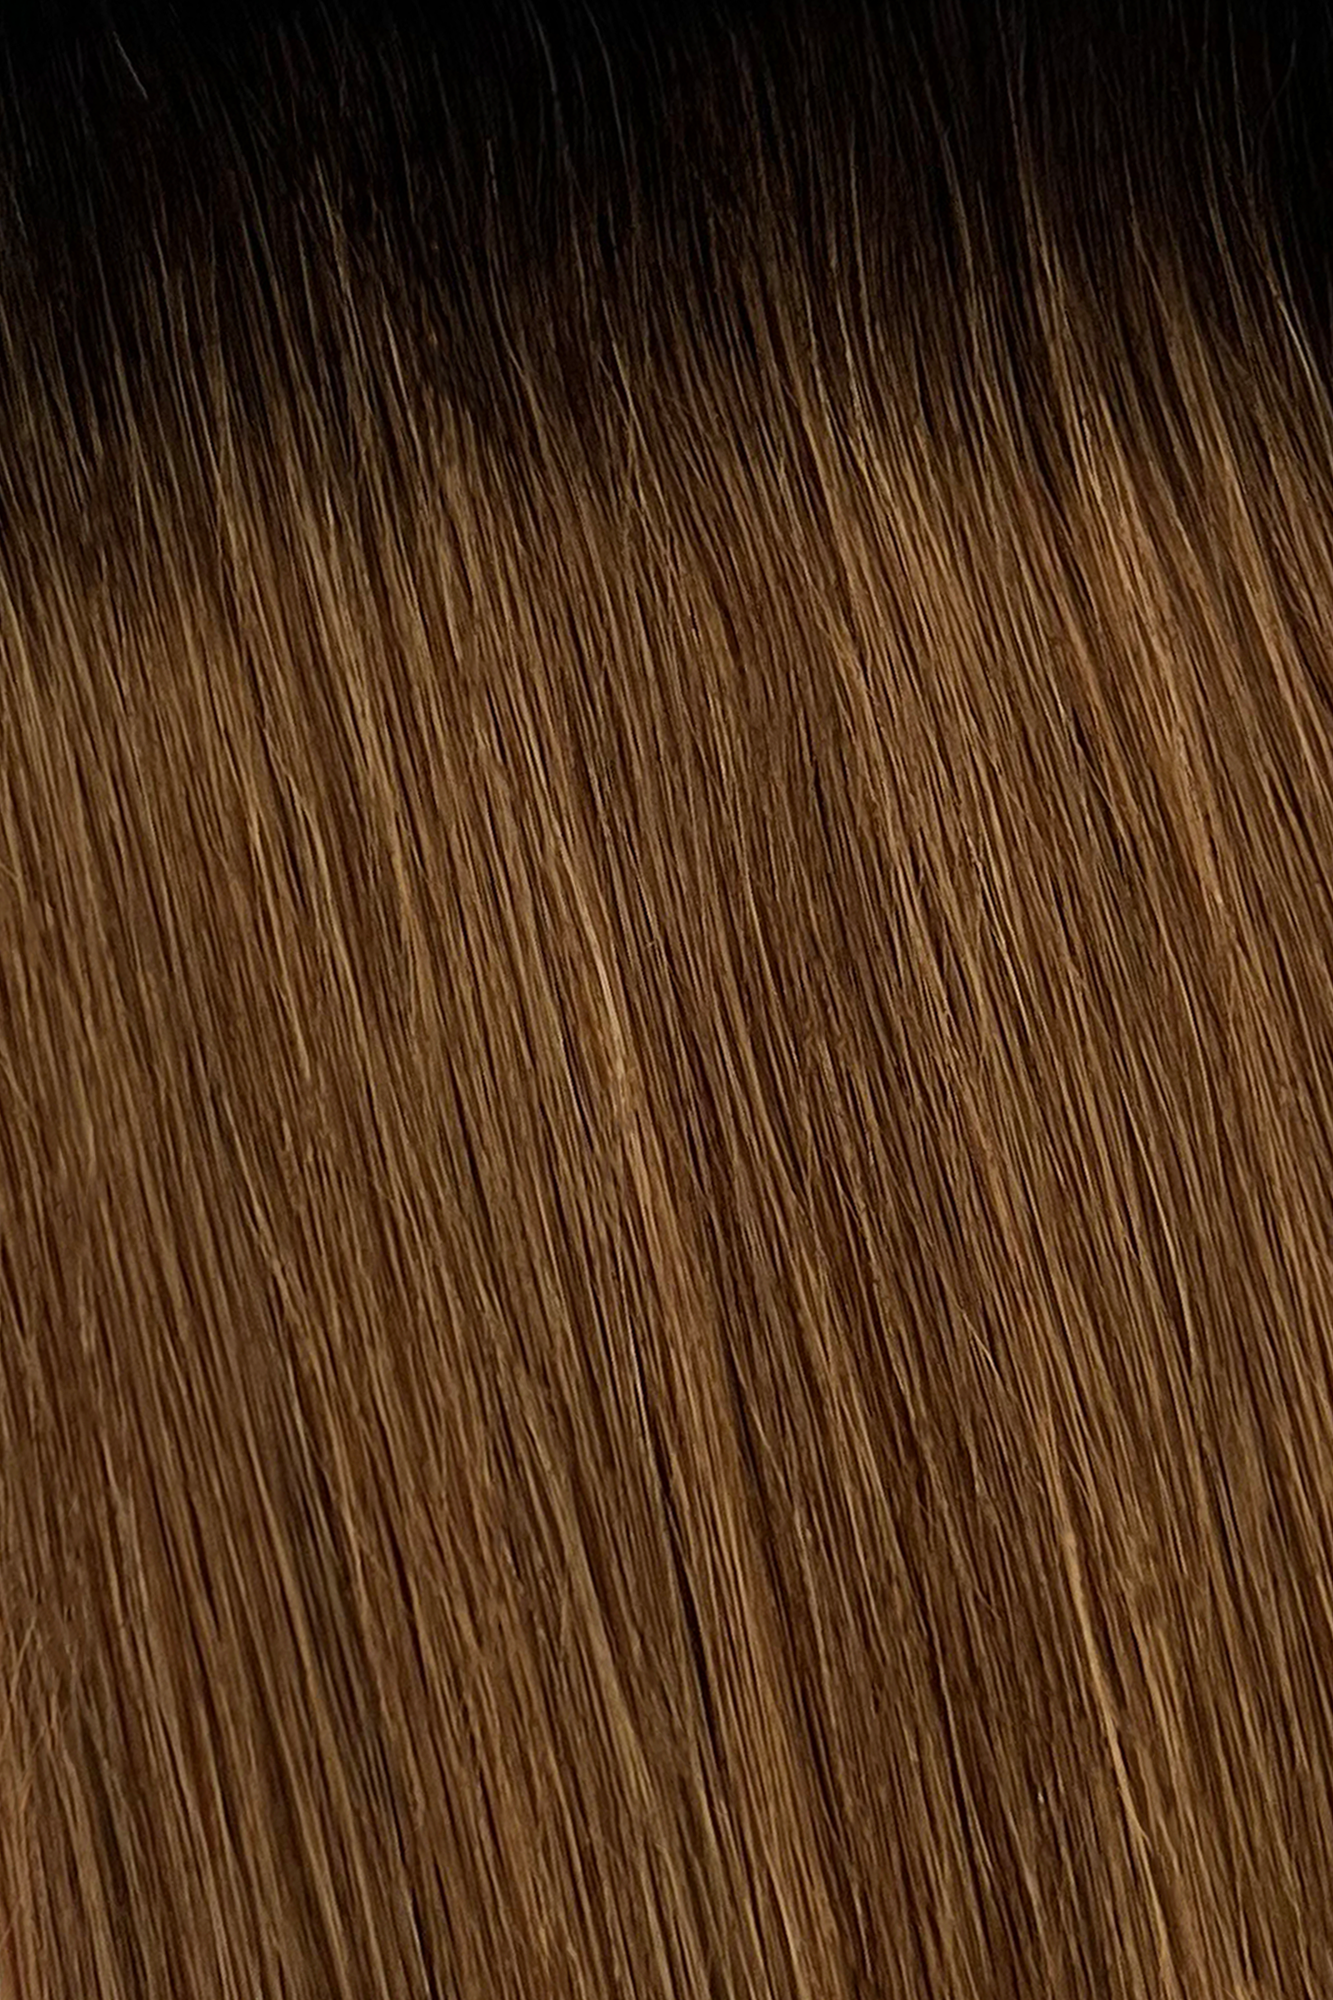 Nano Bonds 24 Inches - SWAY Hair Extensions Americano-R1B-4 Ultra-fine, invisible bonds for a flawless, natural look. 100% Remy Human hair, lightweight and versatile. Reusable and perfect for individual or salon use.